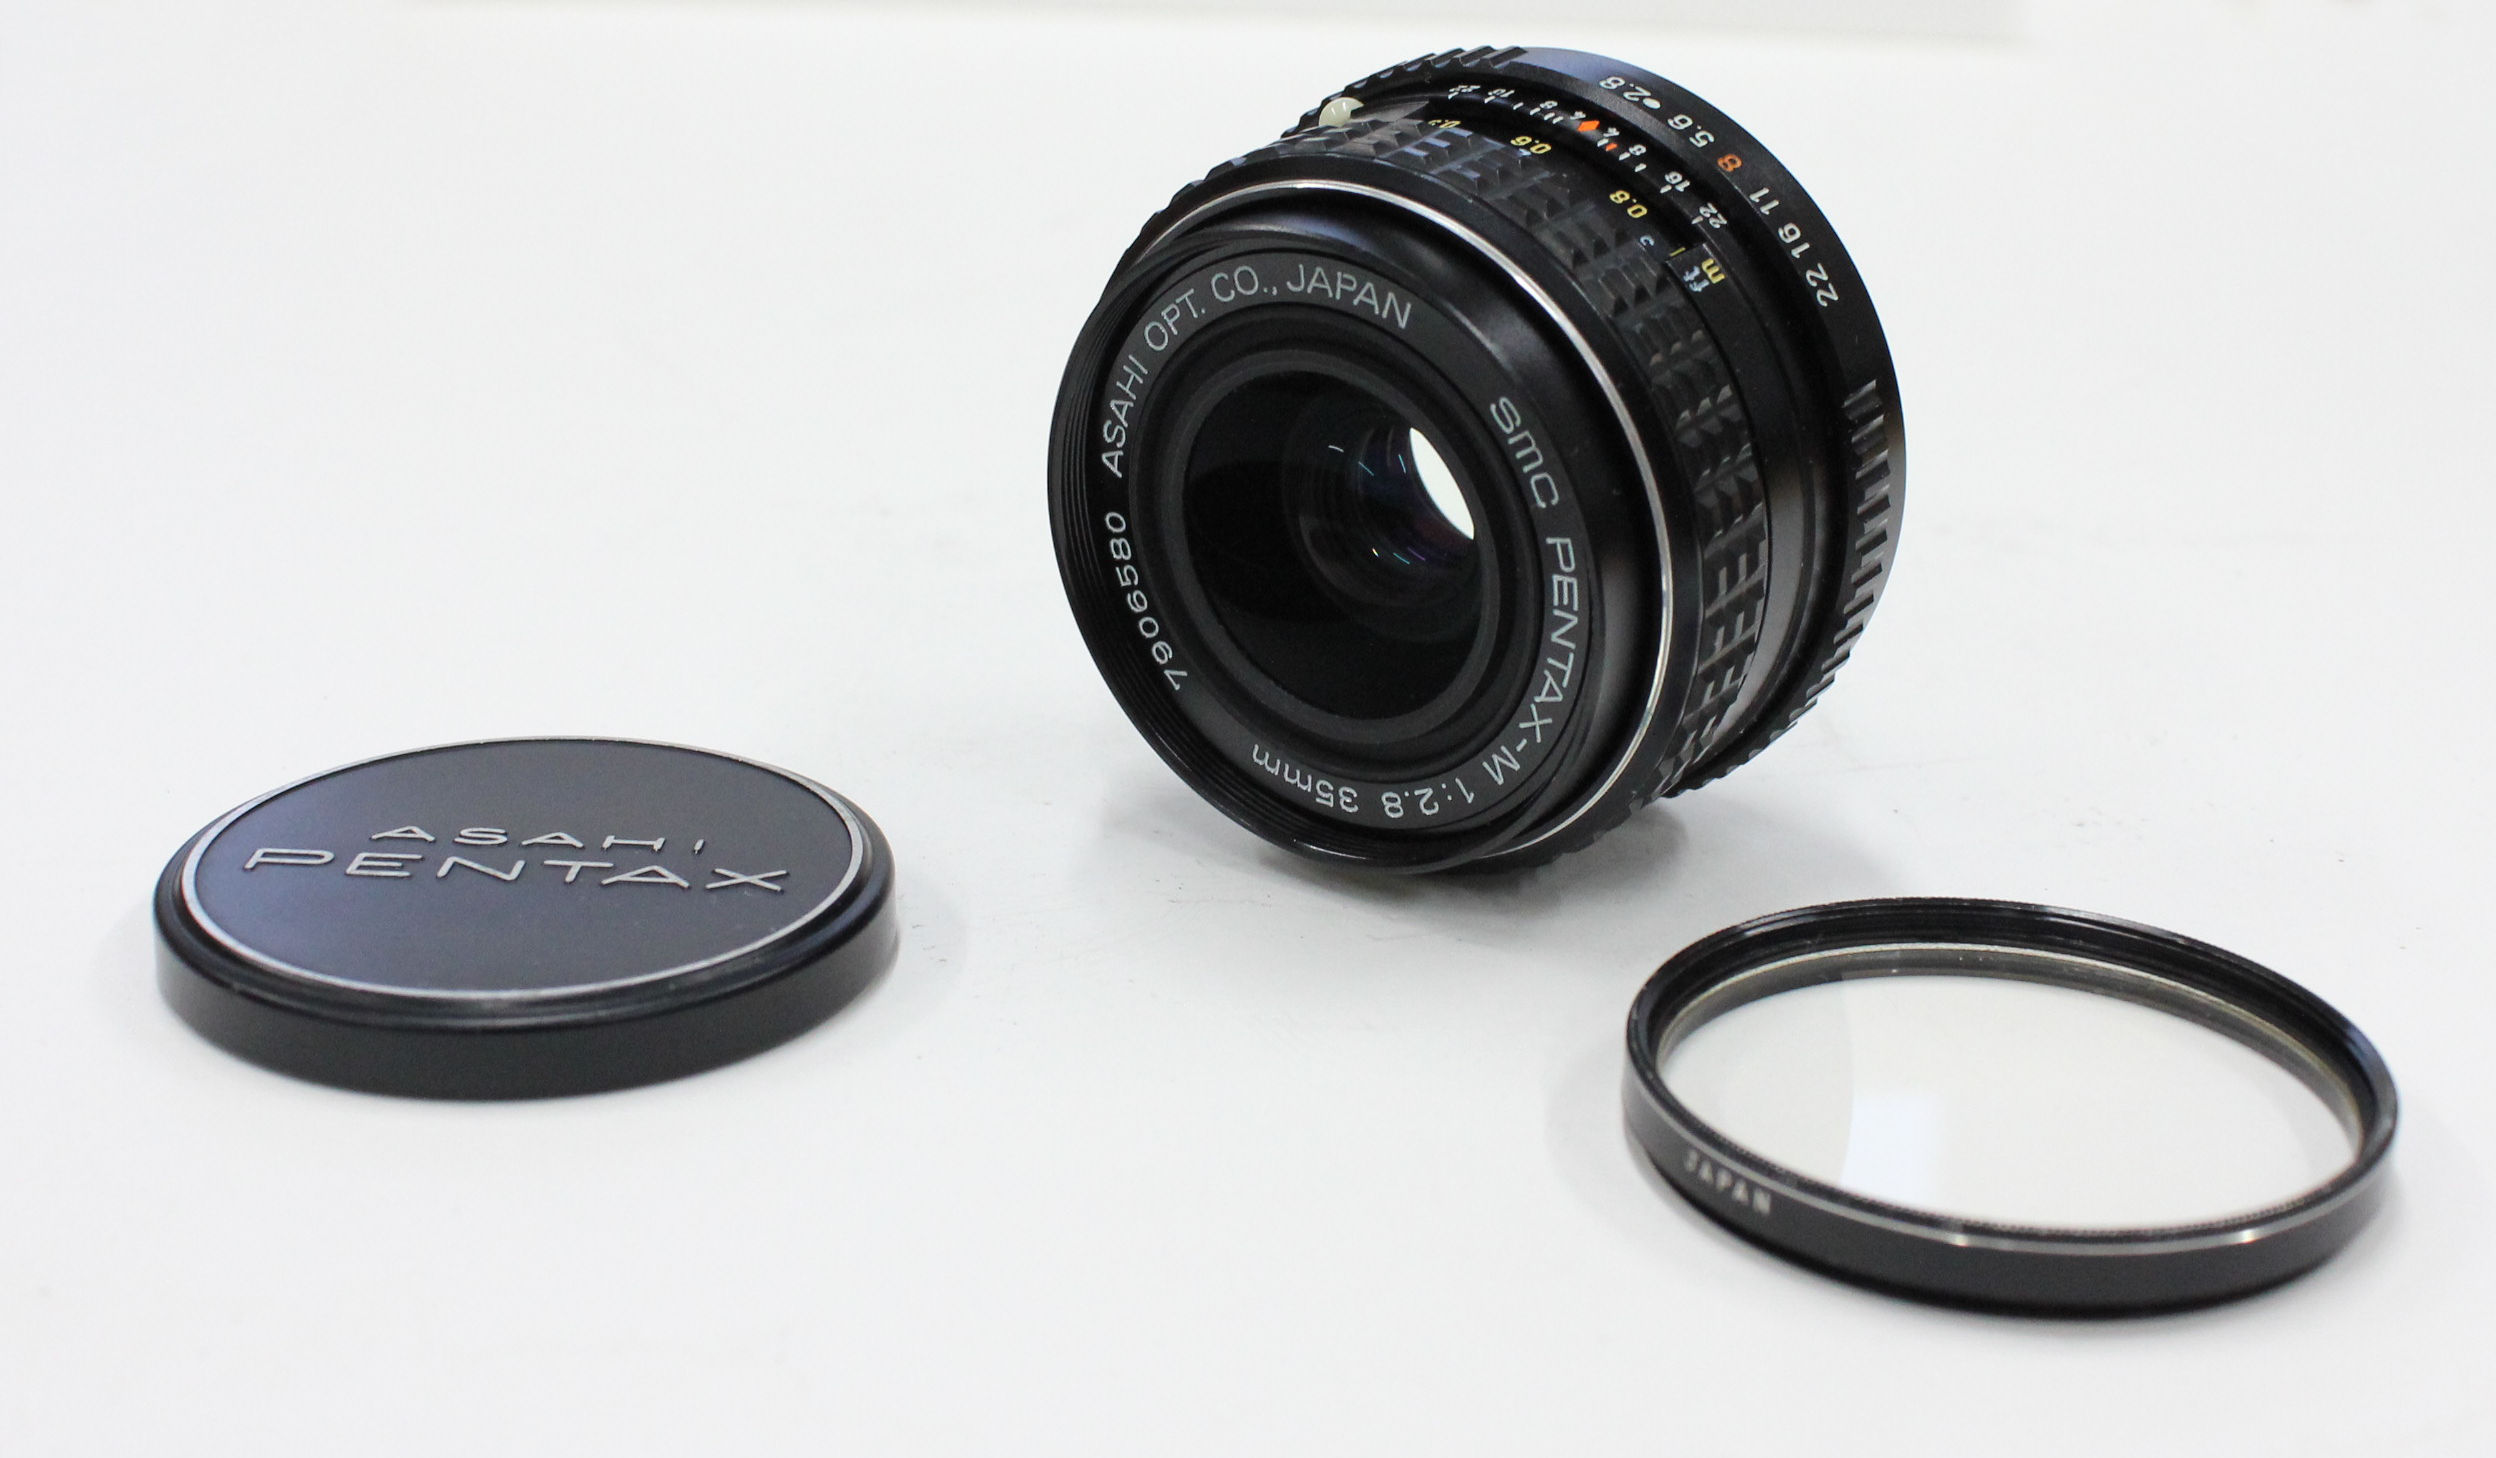 [Near Mint] SMC Pentax-M 35mm F/2.8 MF Lens with Filter from japan